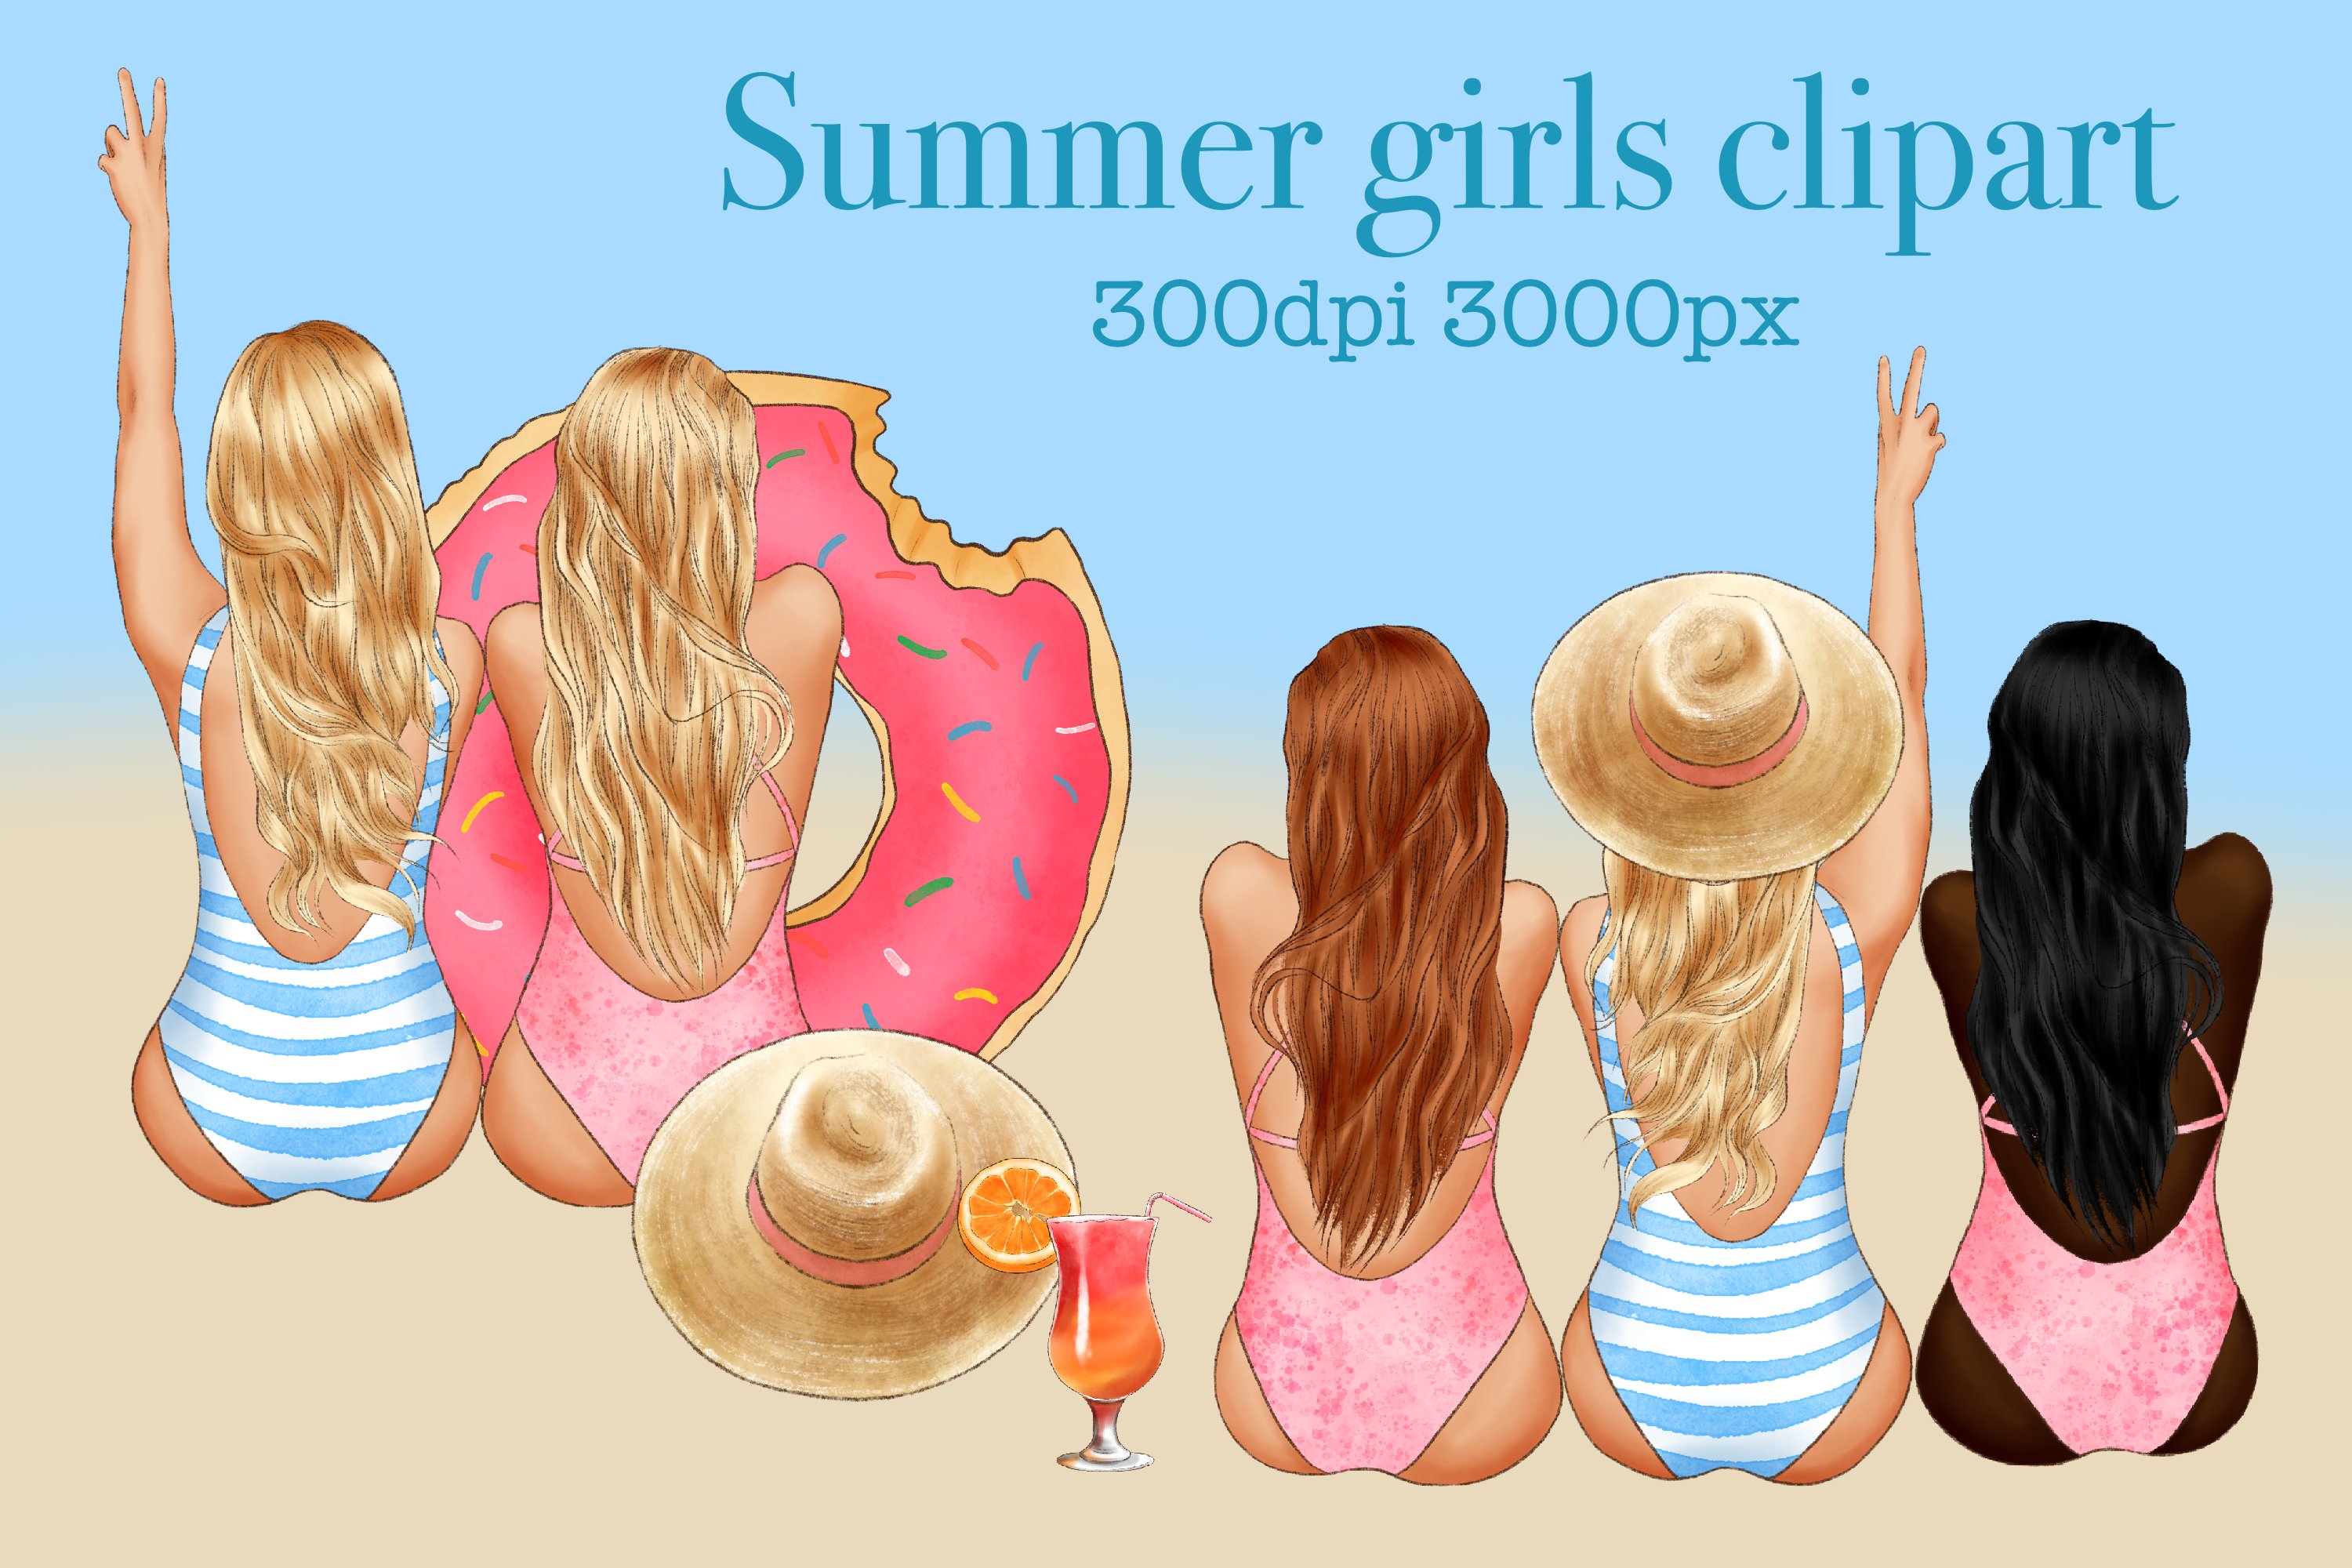 Girls on the Beach Clipart, Summer cover image.